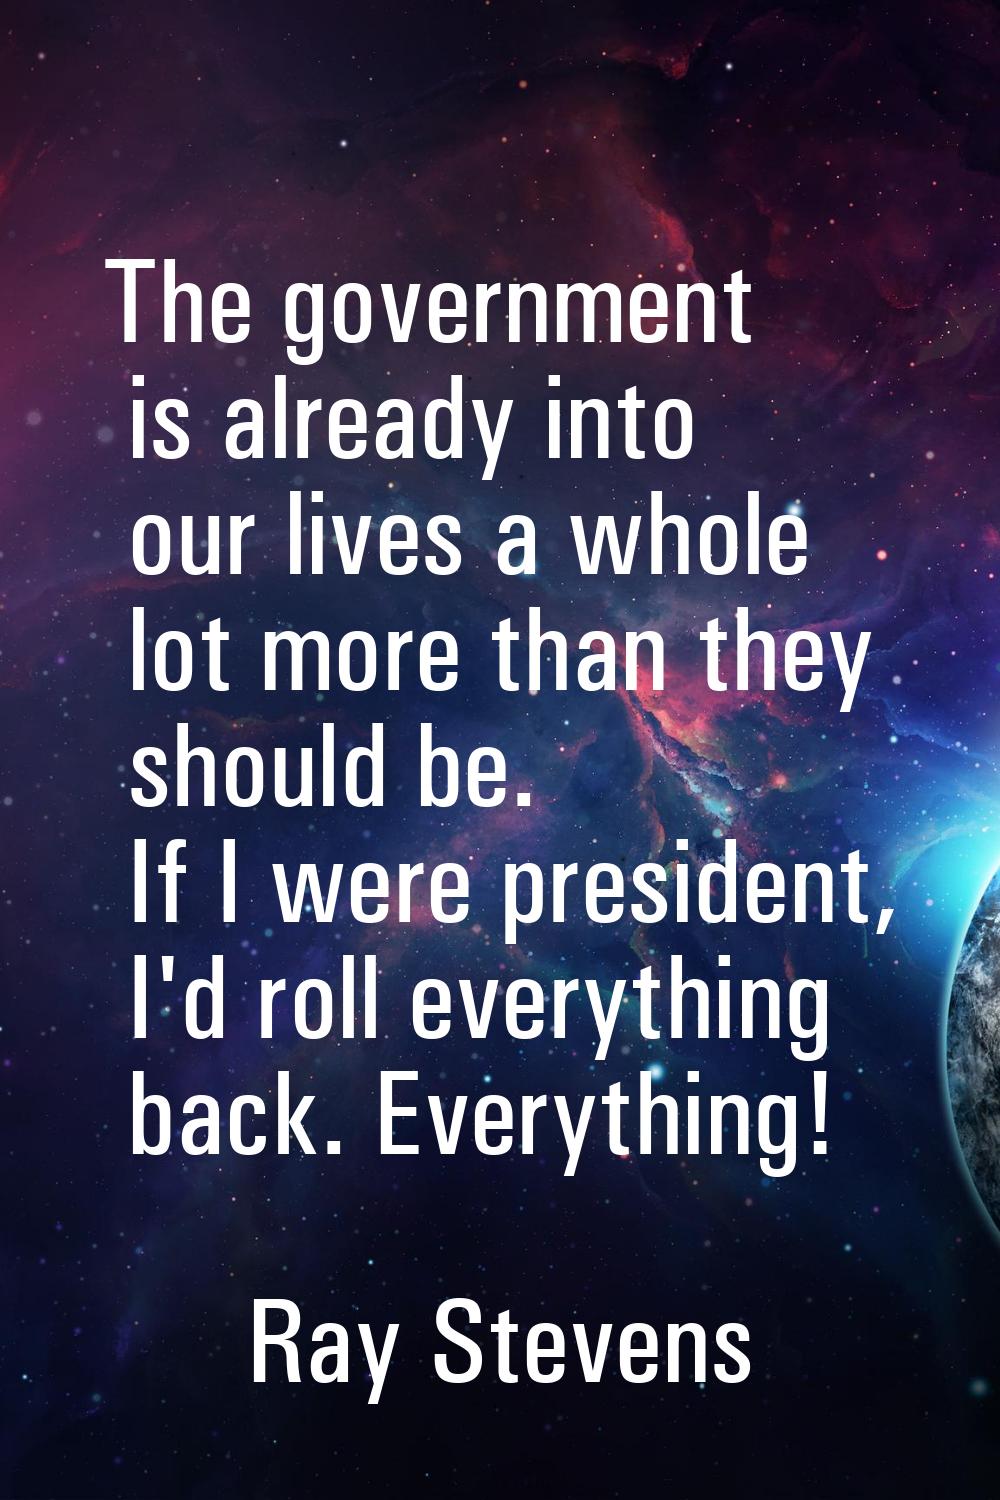 The government is already into our lives a whole lot more than they should be. If I were president,